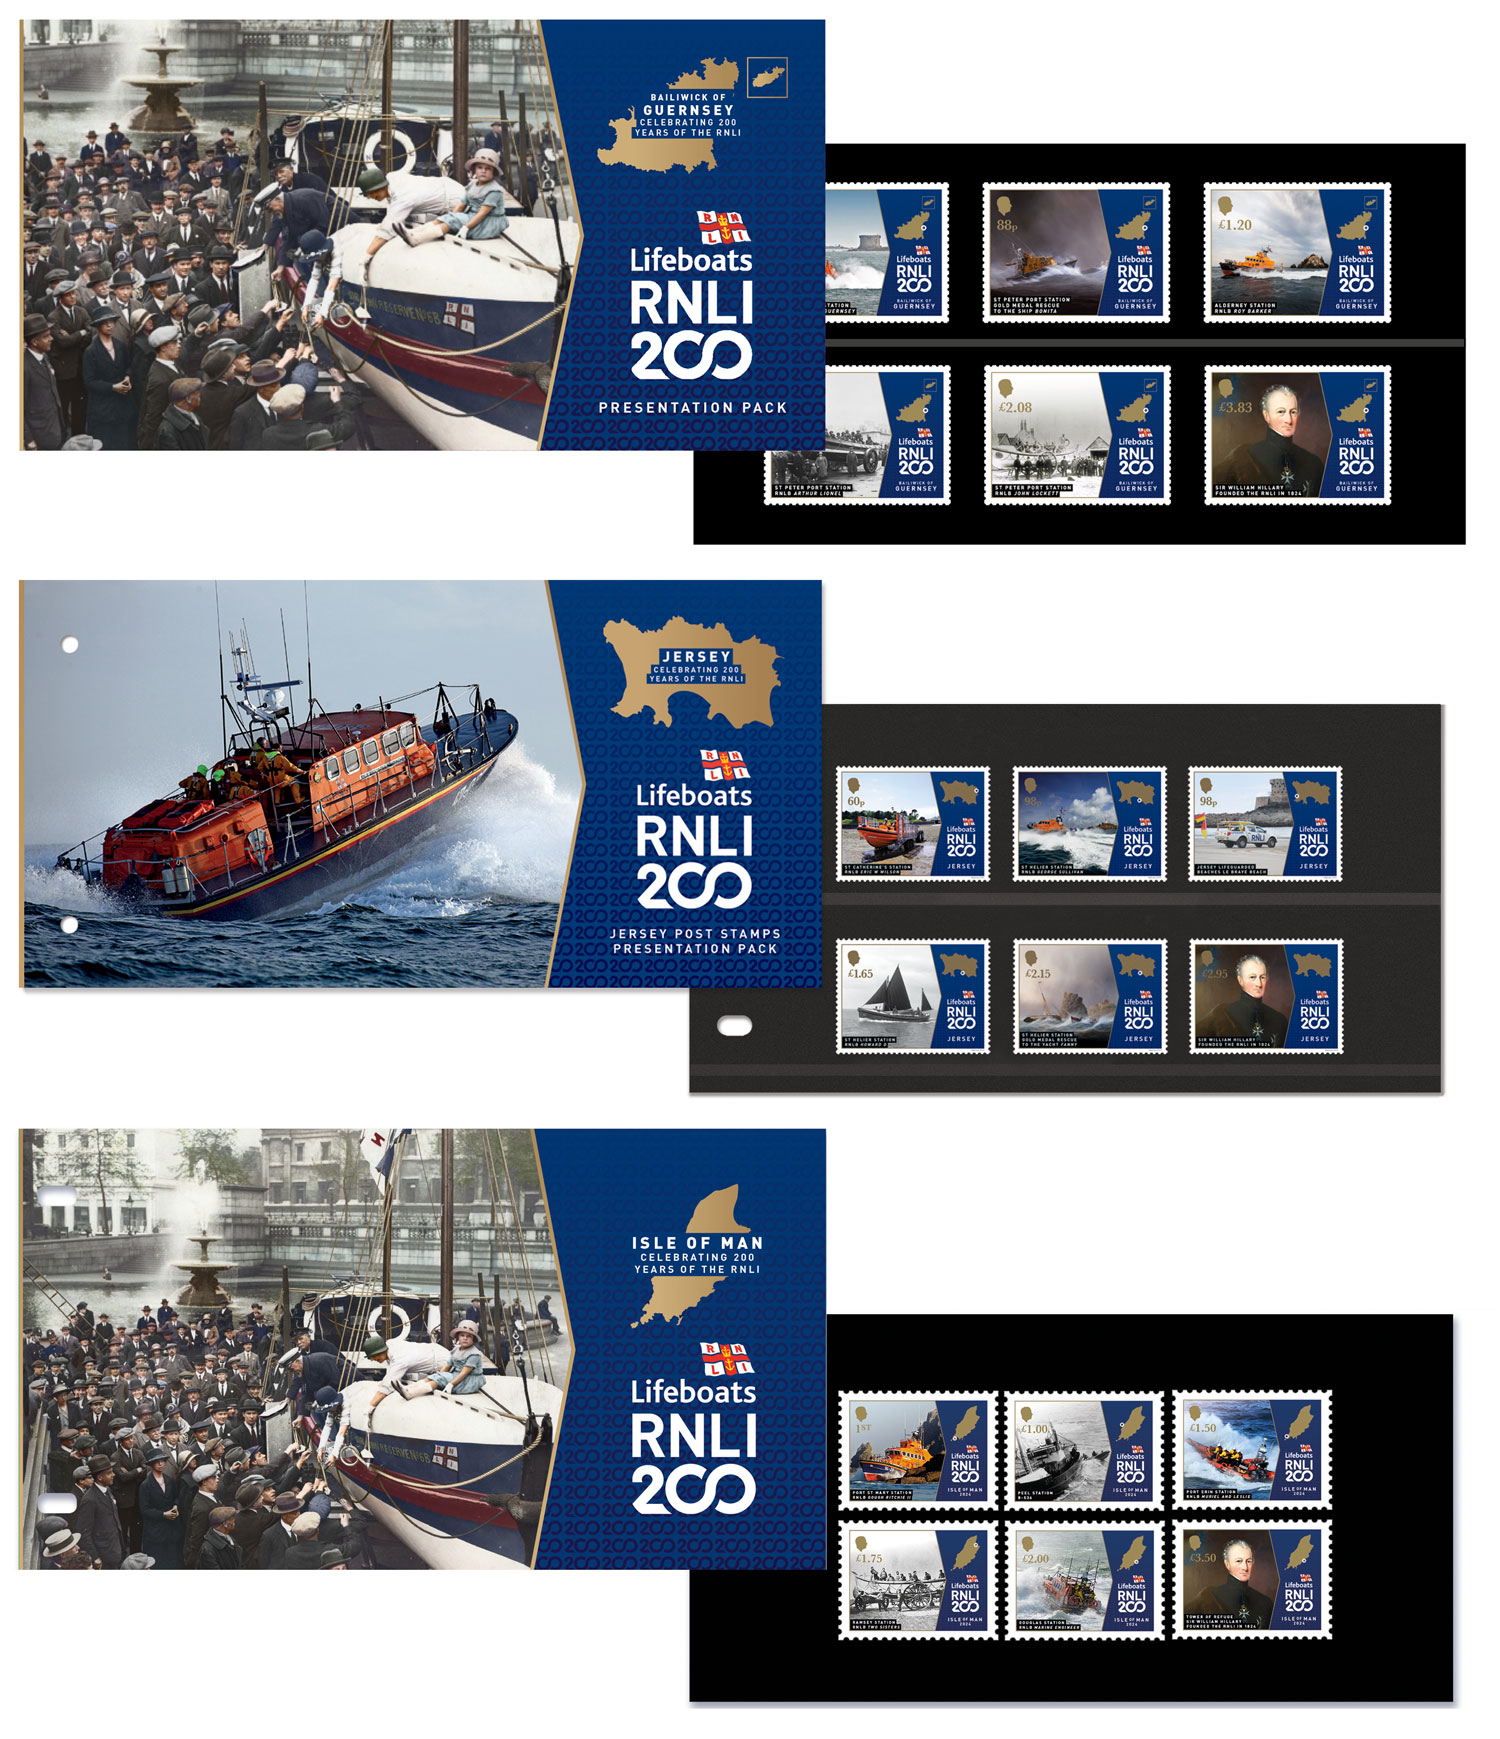 RNLI 200 Presentation Pack Collection